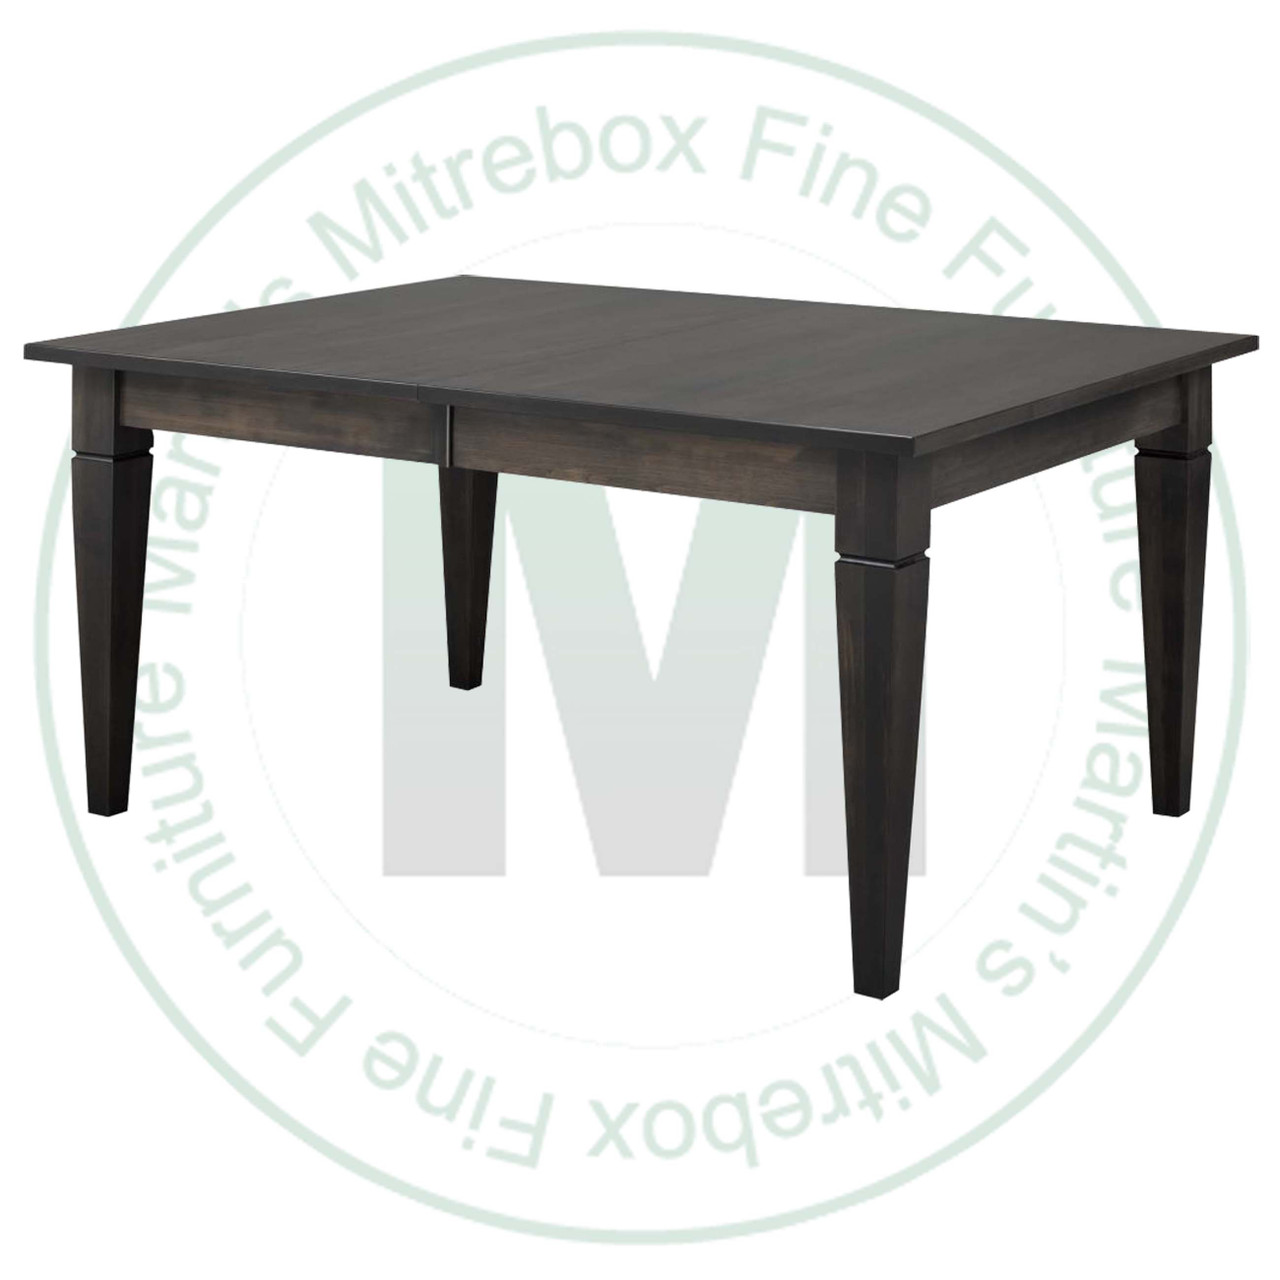 Maple Reesor Extension Harvest Table 60''D x 60''W x 30''H With 3 - 12'' Leaves Table Has 1 3/4'' Thick Top